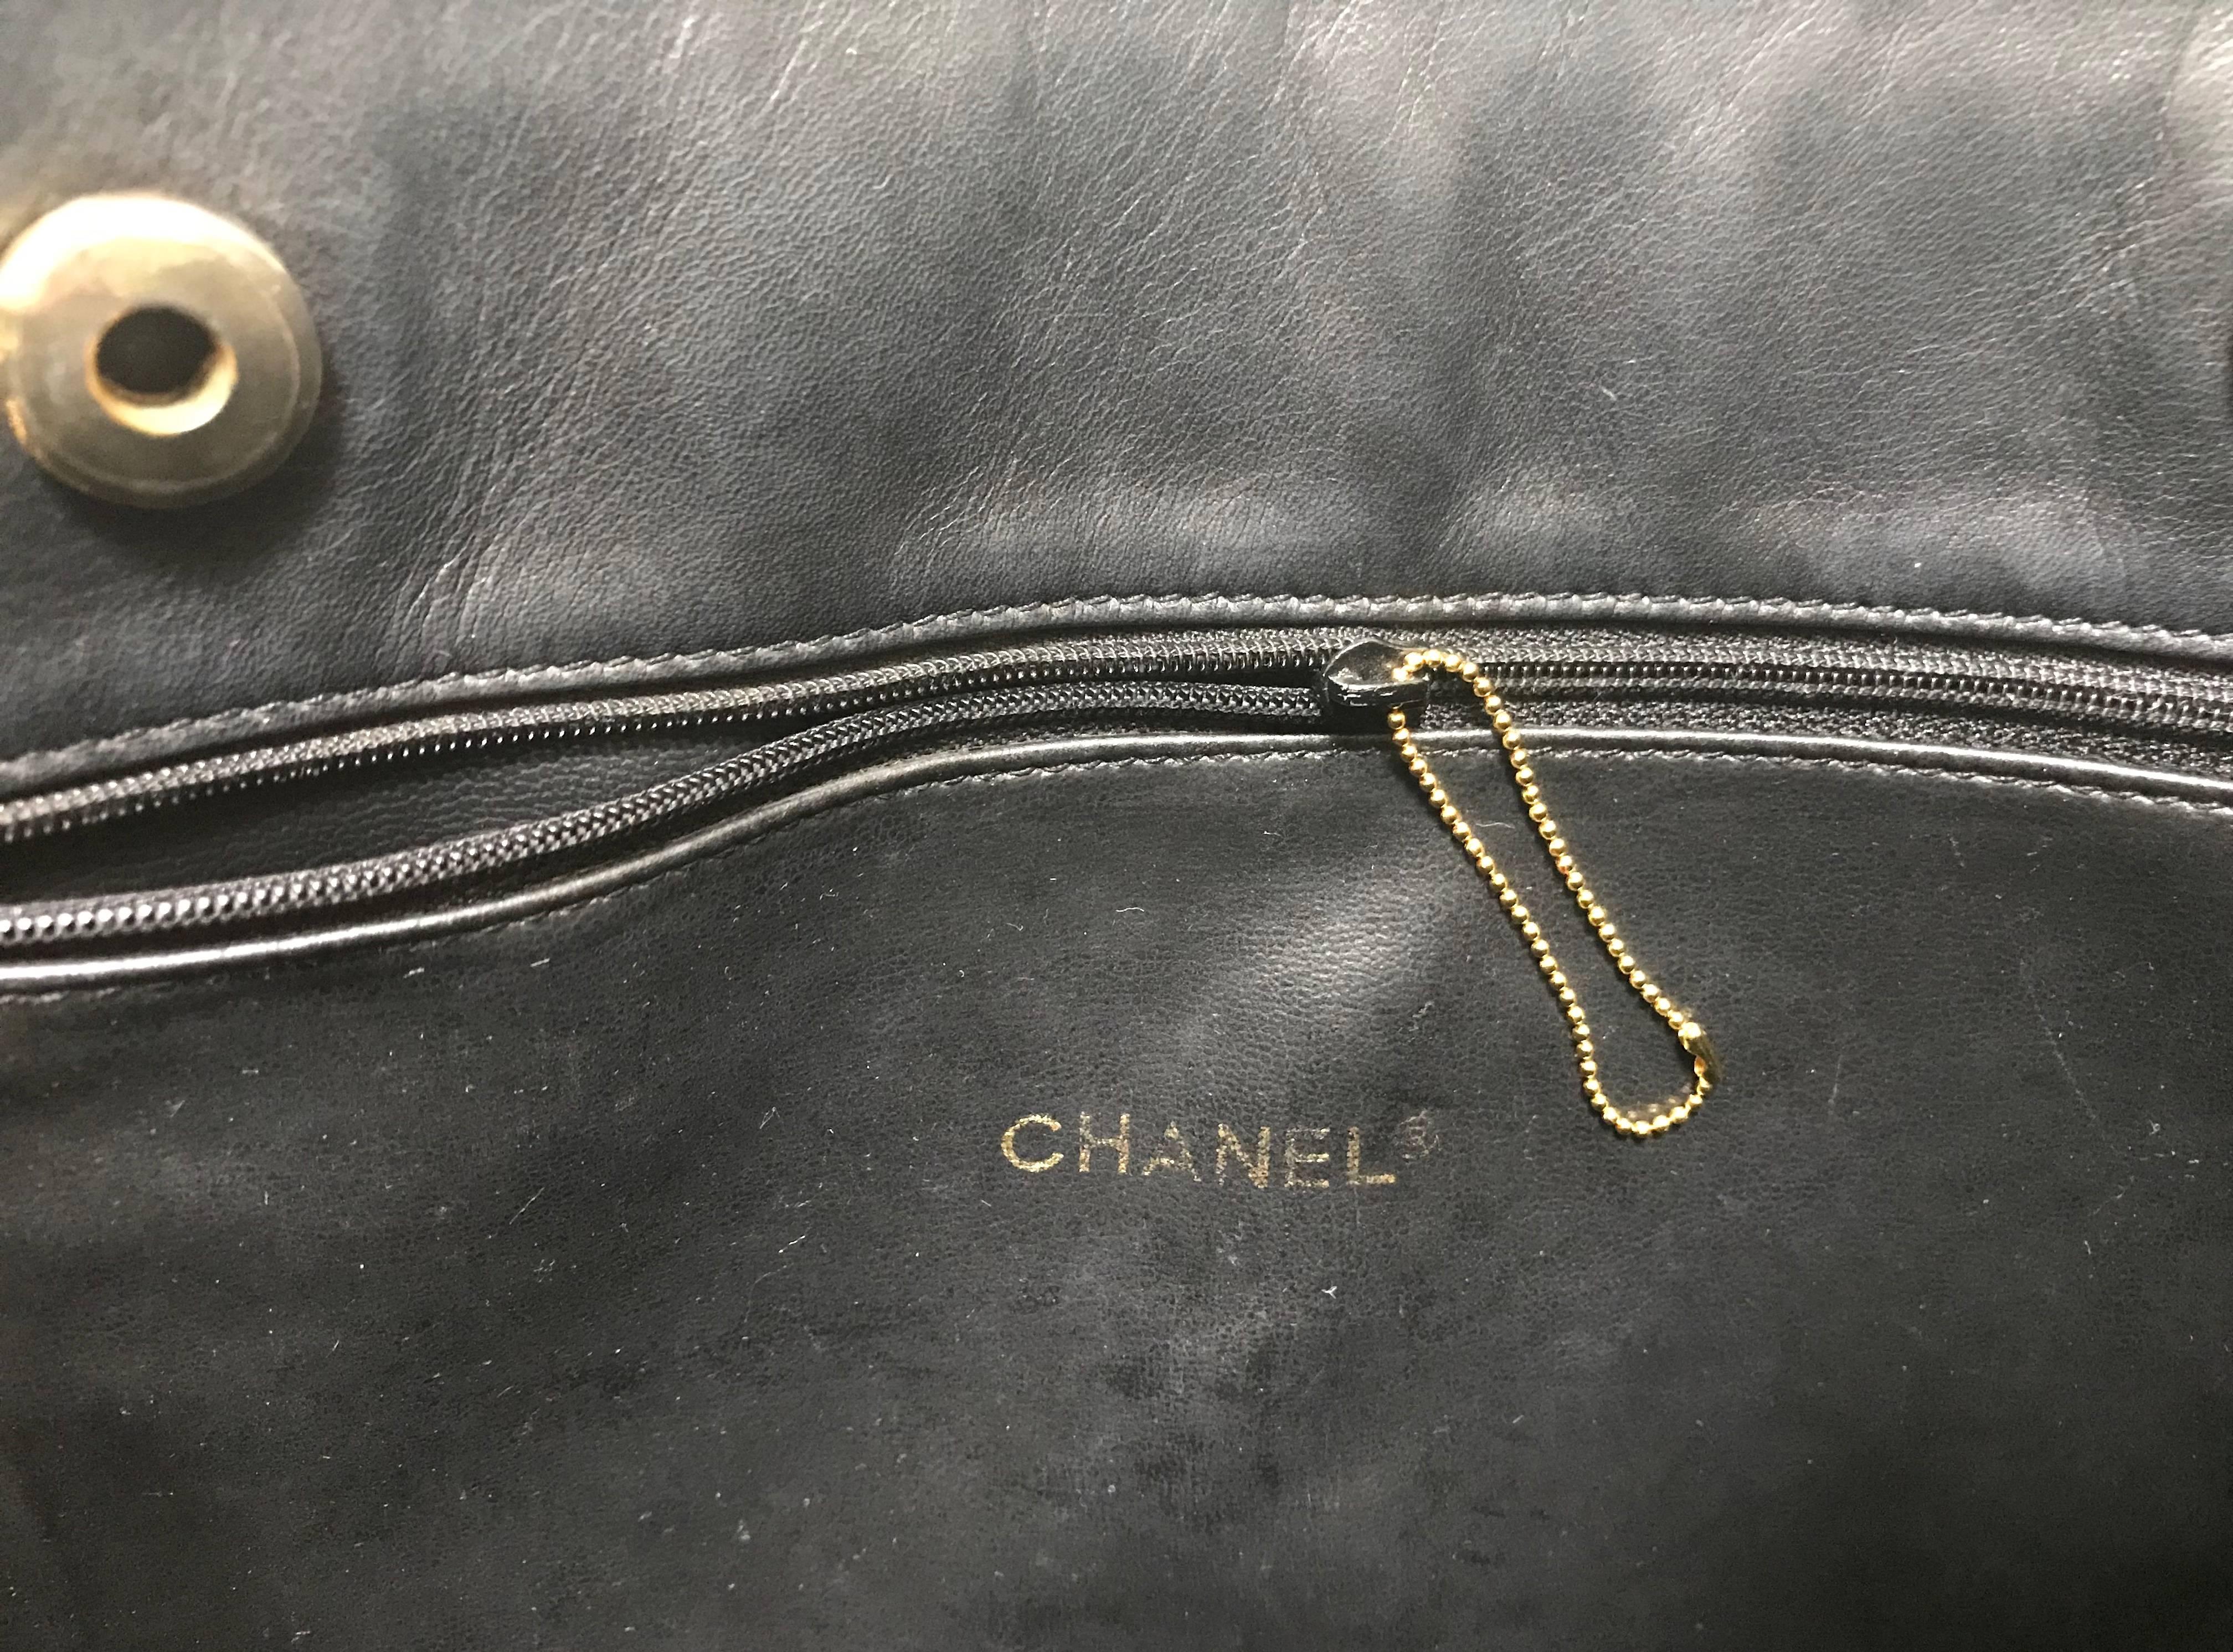 Vintage CHANEL classic black leather shoulder bag, tote purse with golden chains 2